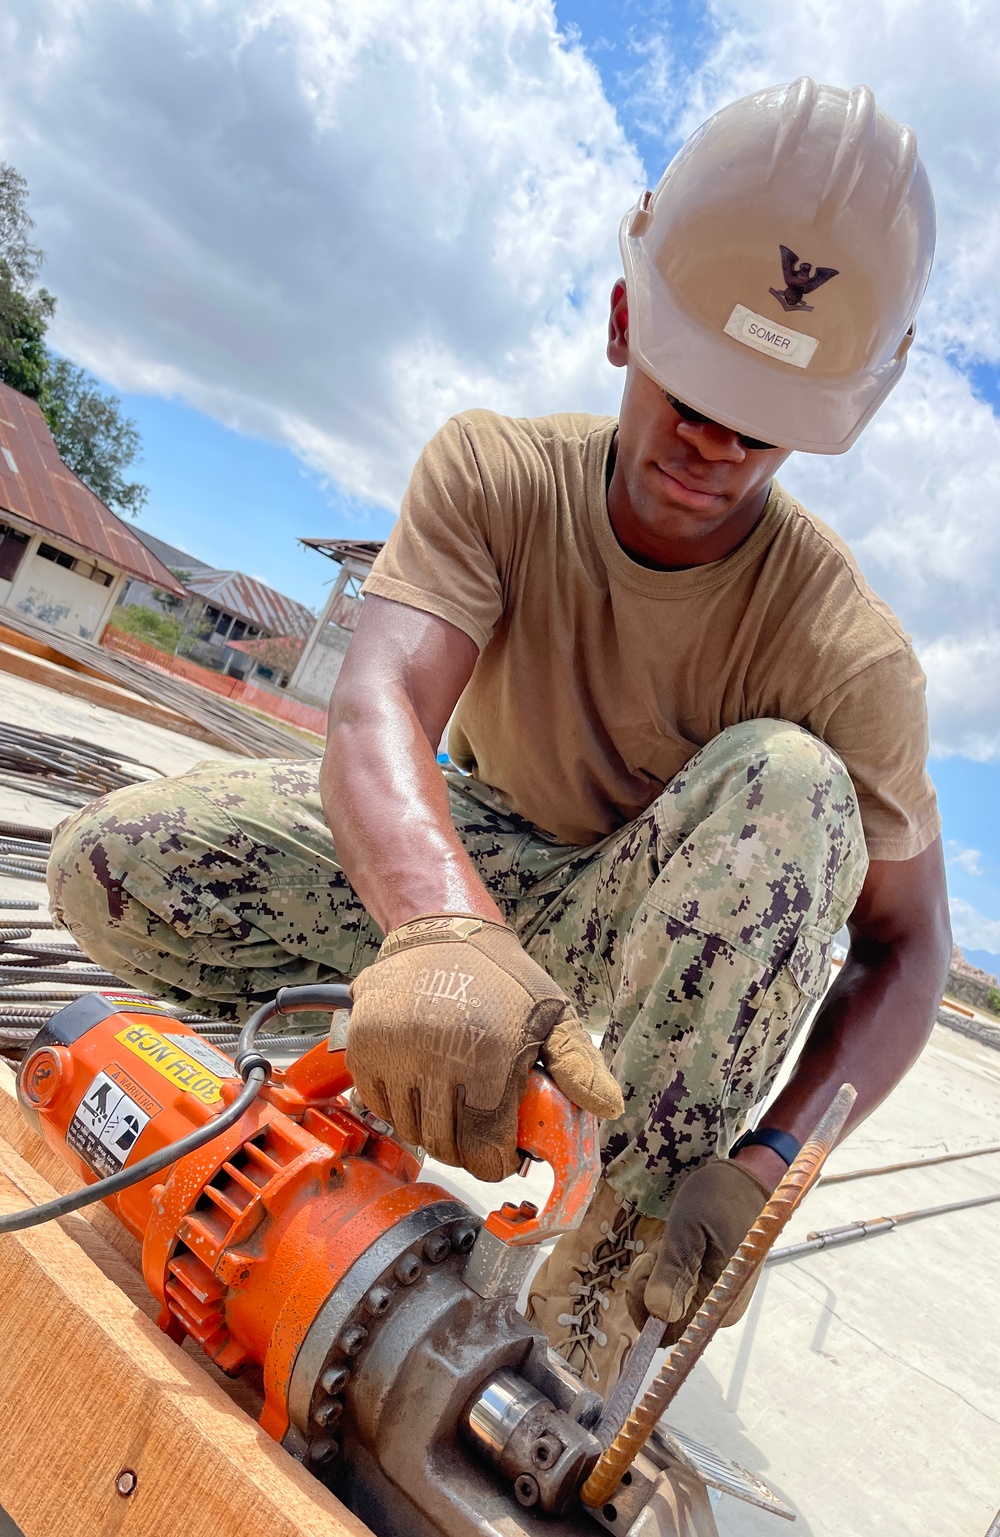 U.S. Navy Seabees with NMCB-5 build a schoolhouse in Timor-Leste